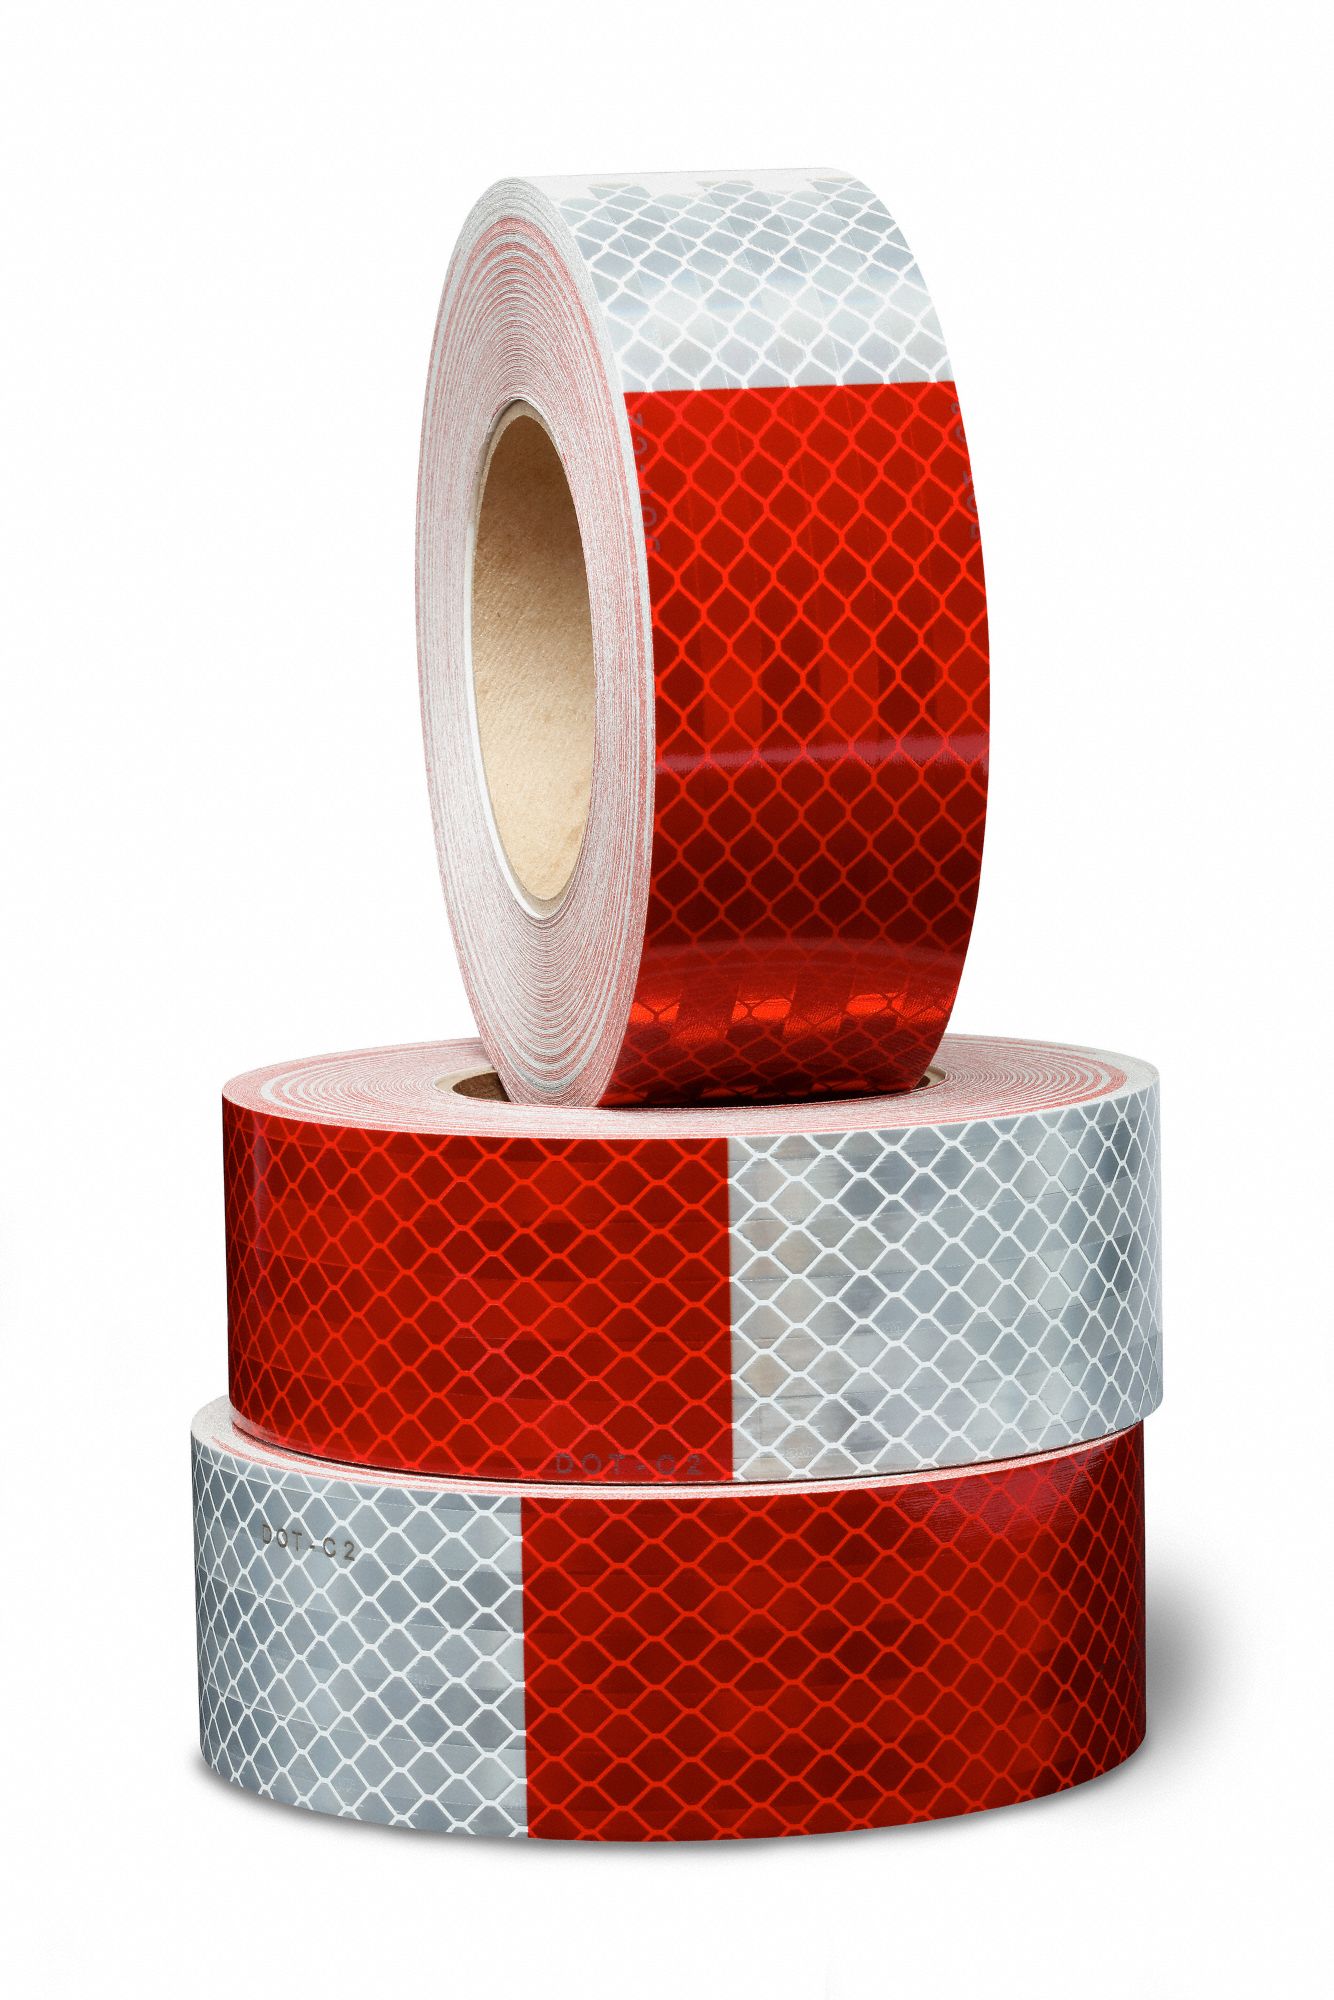 WHITE RED Reflective   Conspicuity Tape 1-1/2" x 50' 7-11 